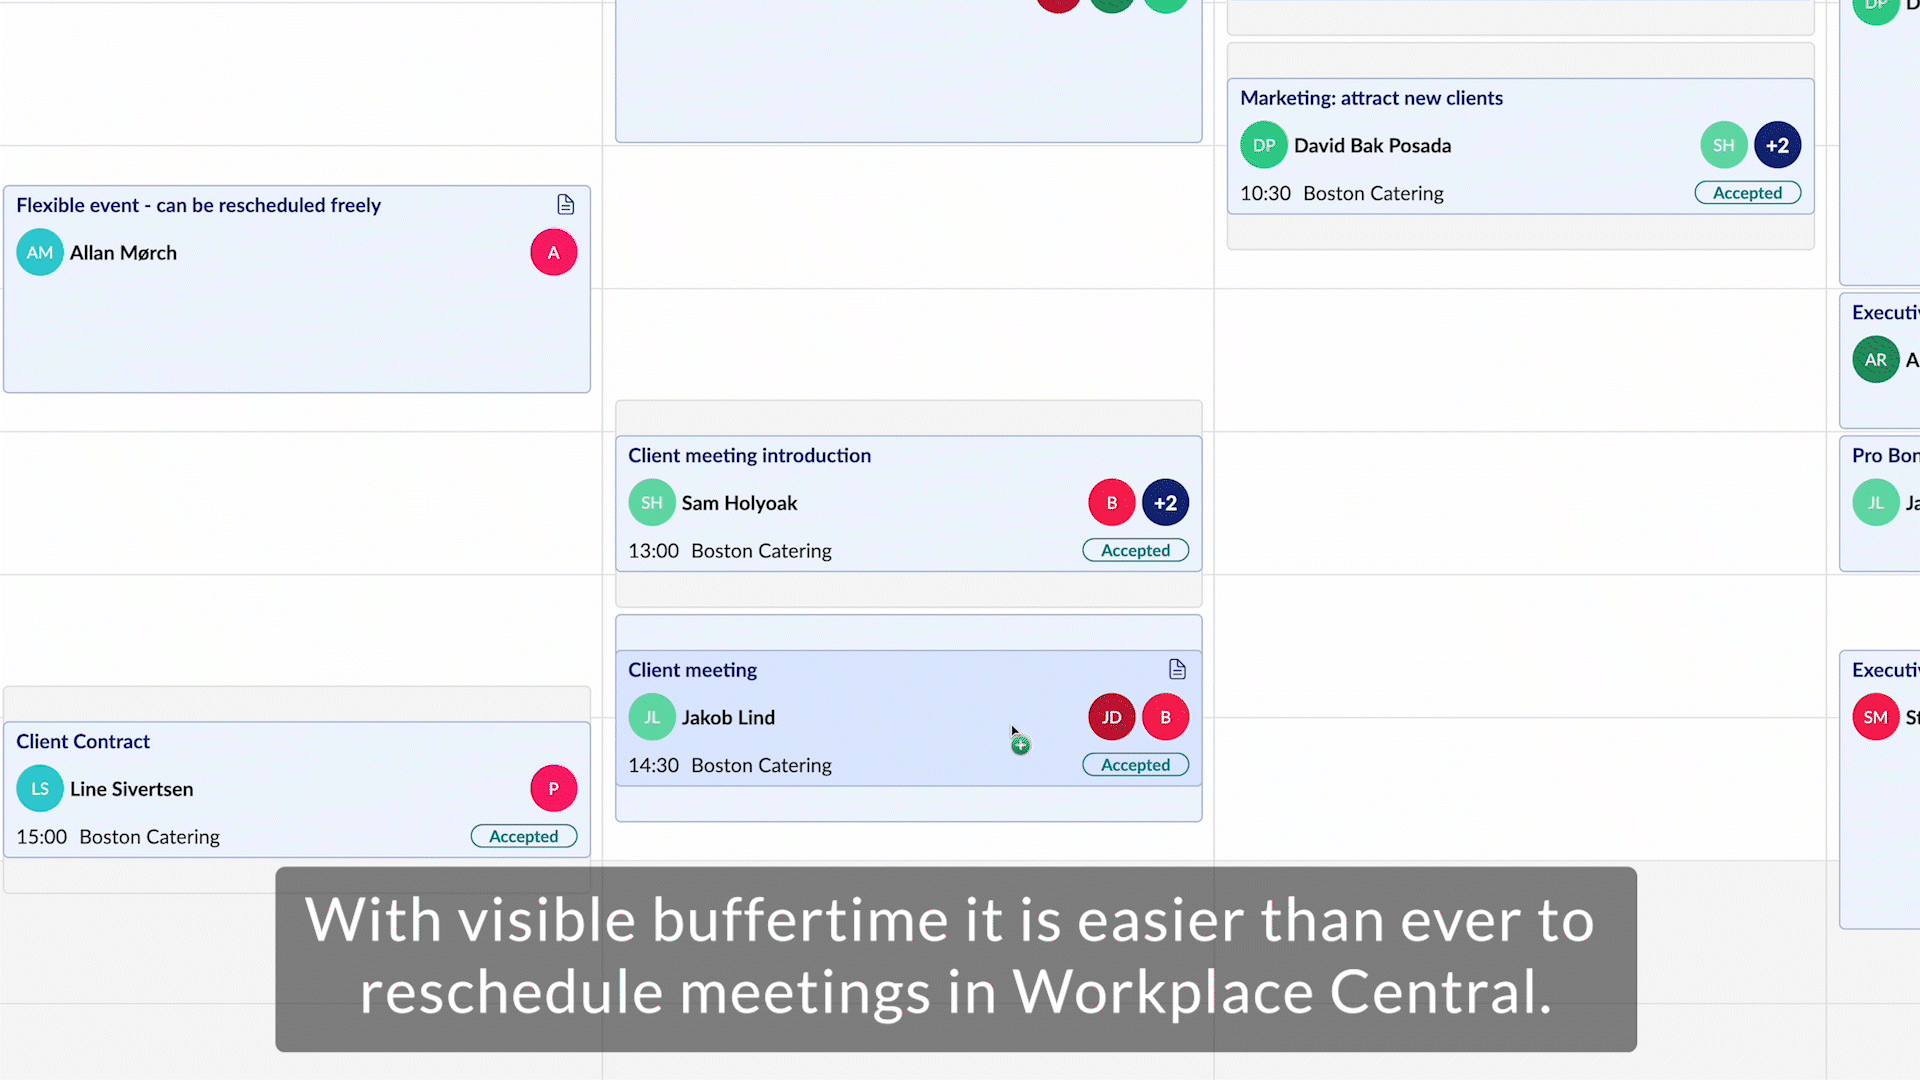 Buffer-time visible in AskCody Meeting Management tool Workplace Central